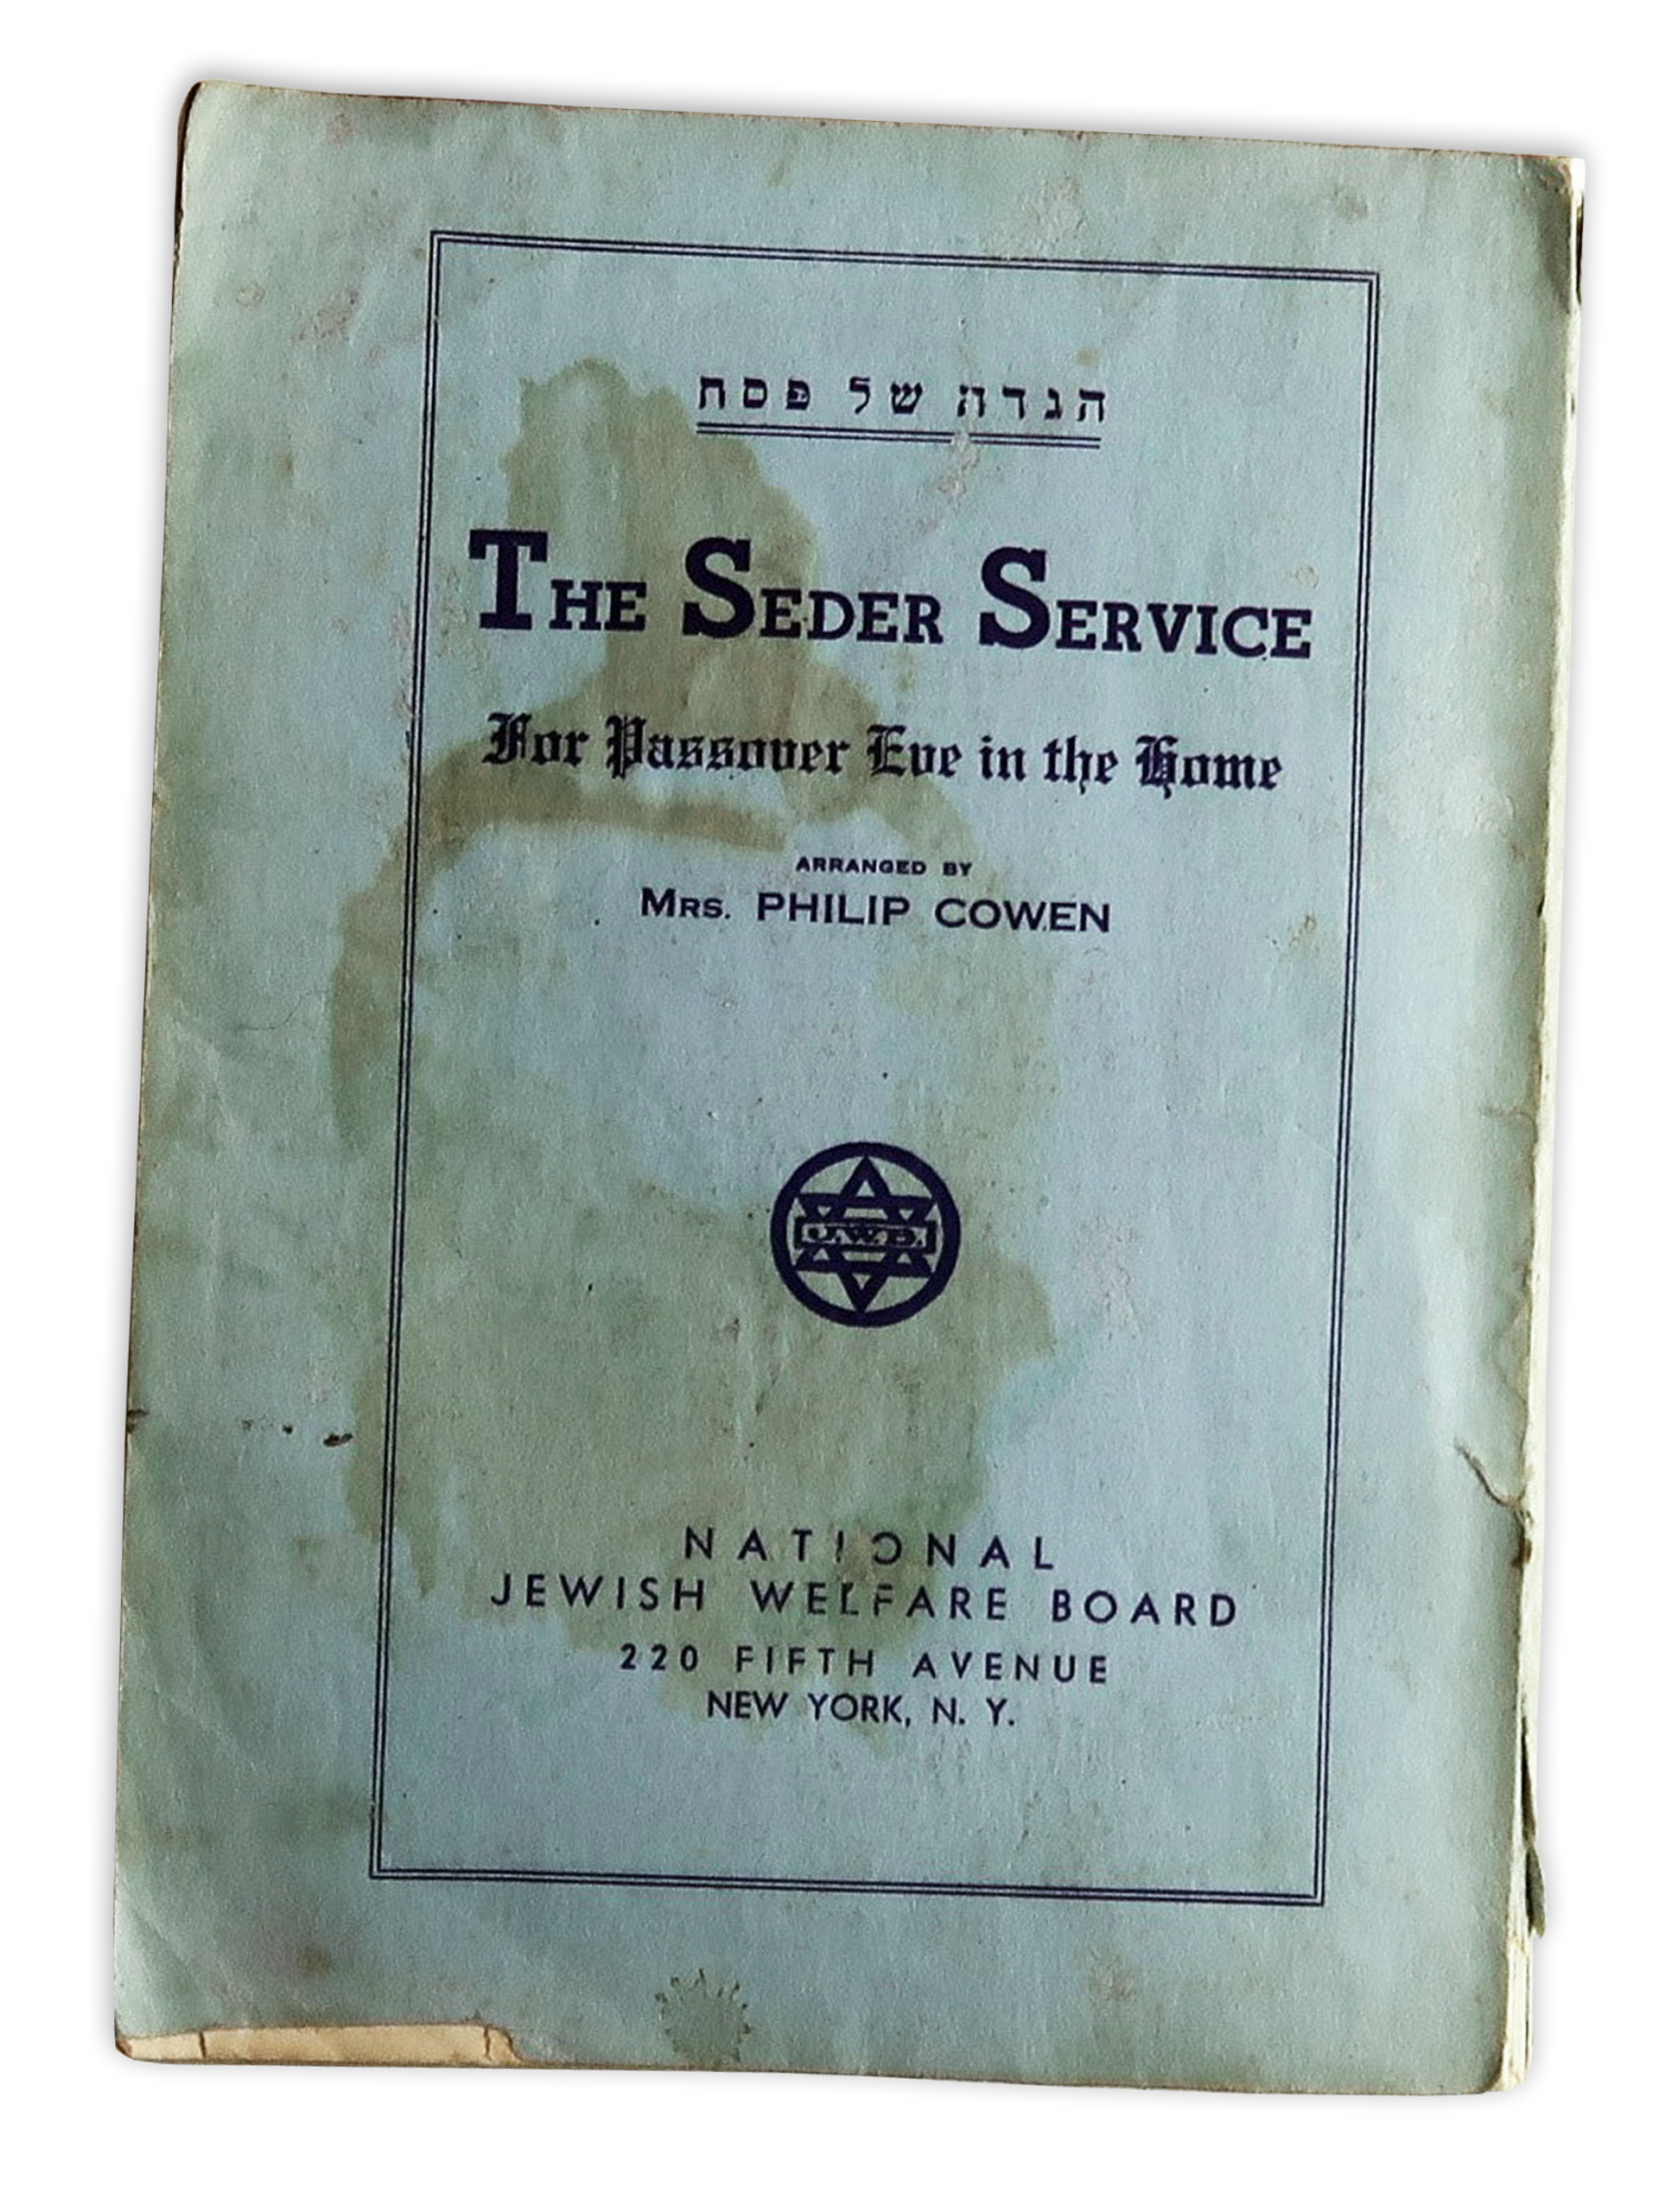 A 1935 edition of The Seder Service